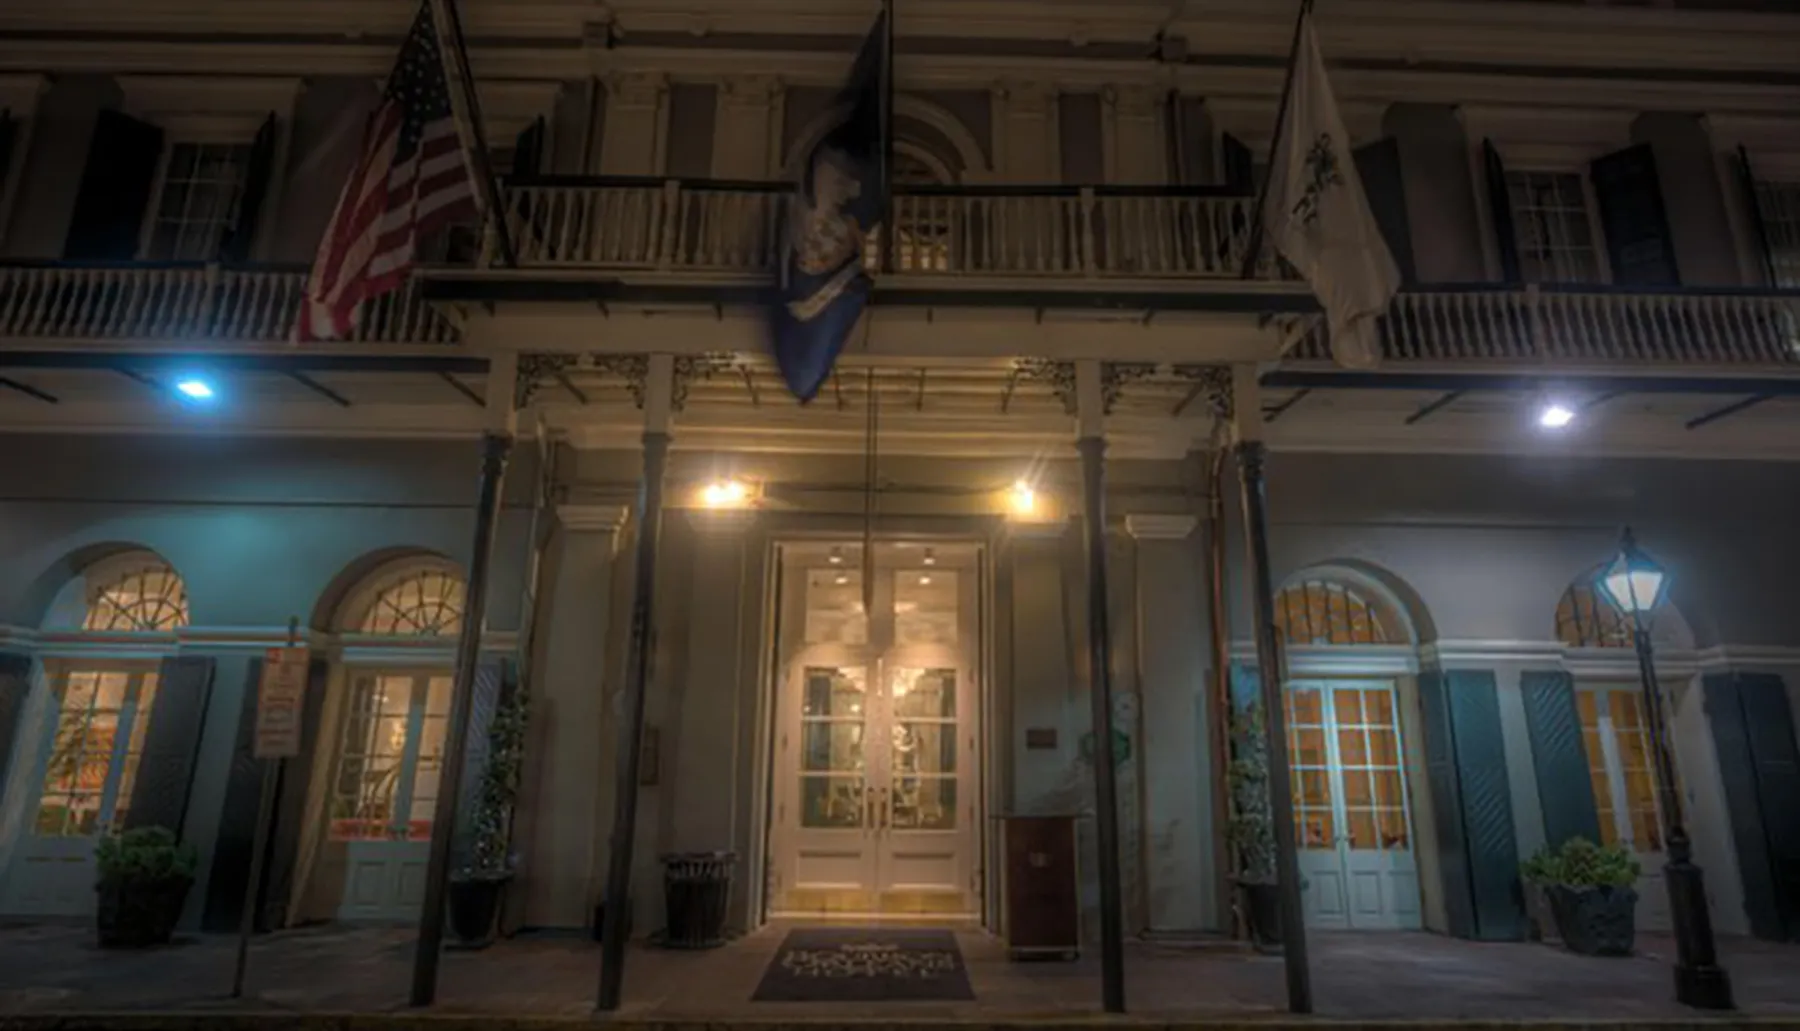 The image depicts the atmospheric facade of a two-story building at night, with an illuminated entrance flanked by American and state flags above a balcony, characteristic of traditional architecture in New Orleans.